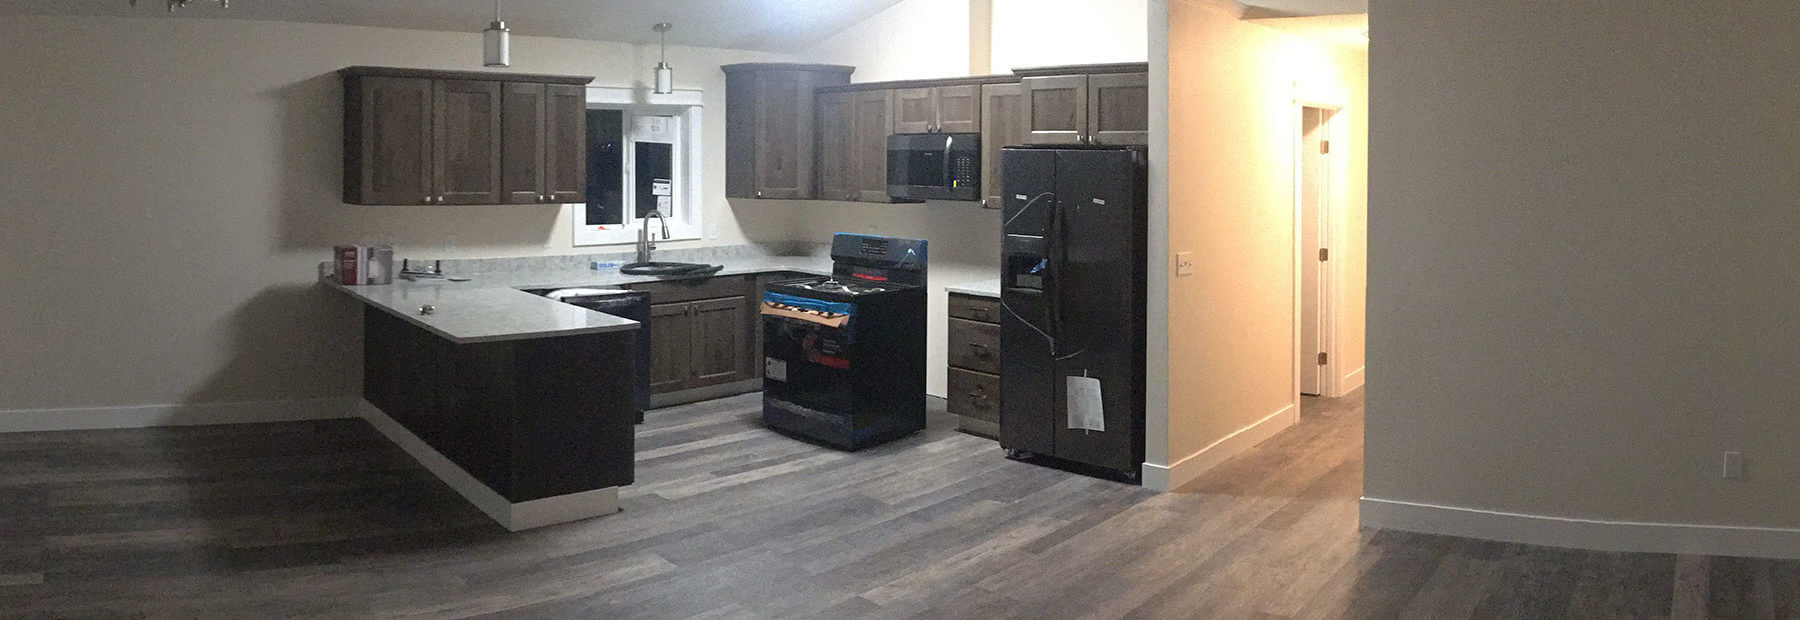 Single Family Home - Wasilla - Kitchen and Living